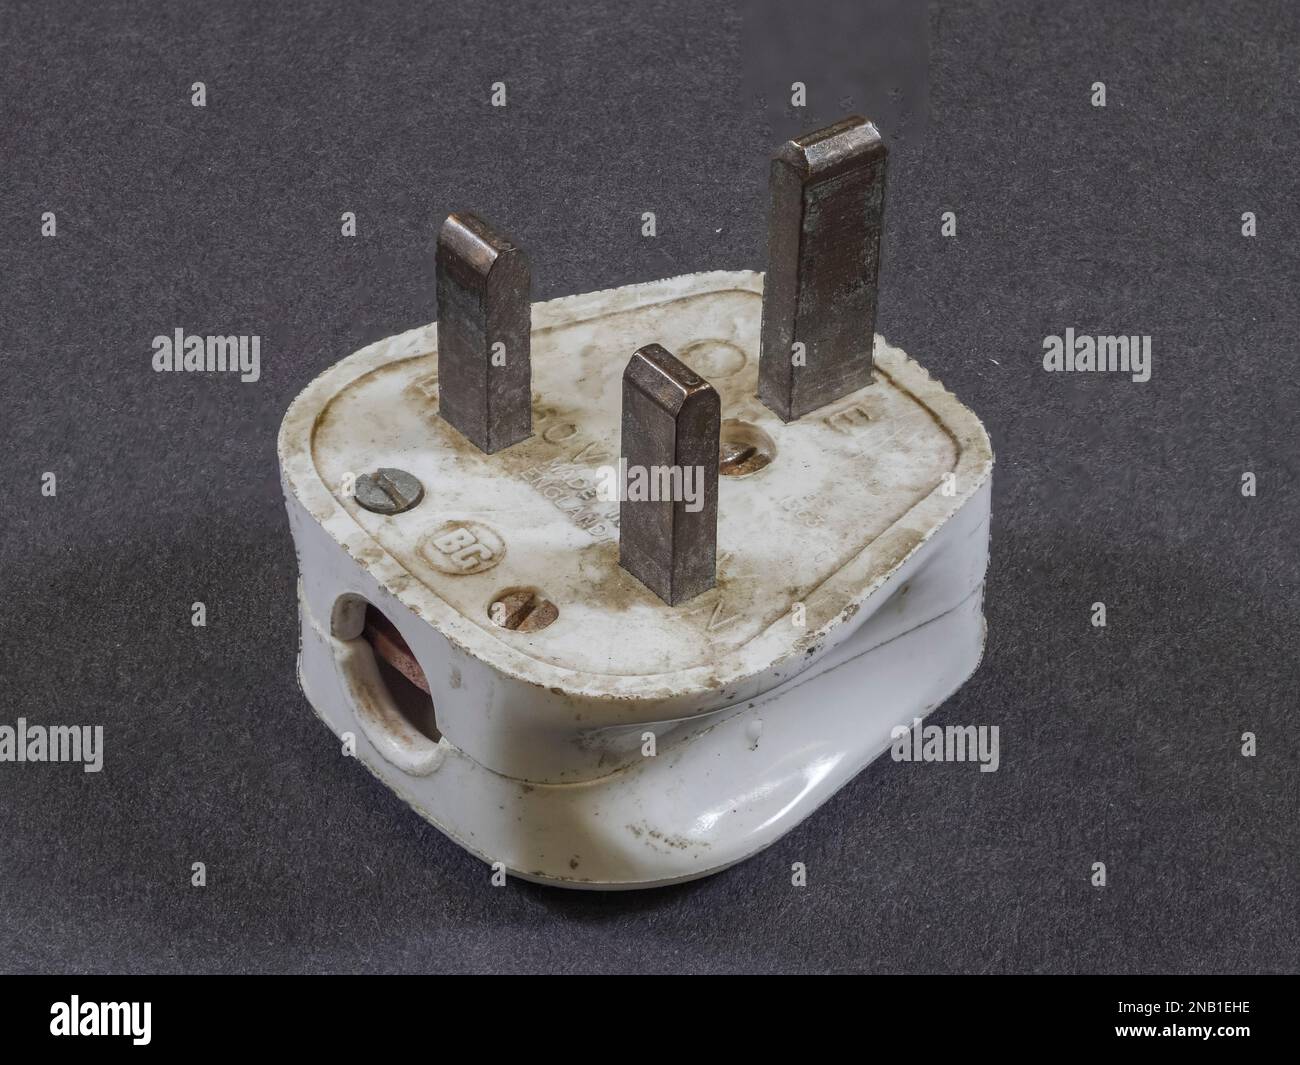 Example of a pre-1984 British 3 pin mains plug (after 1984, insulating sleeves were required on the live and neutral pins). Stock Photo